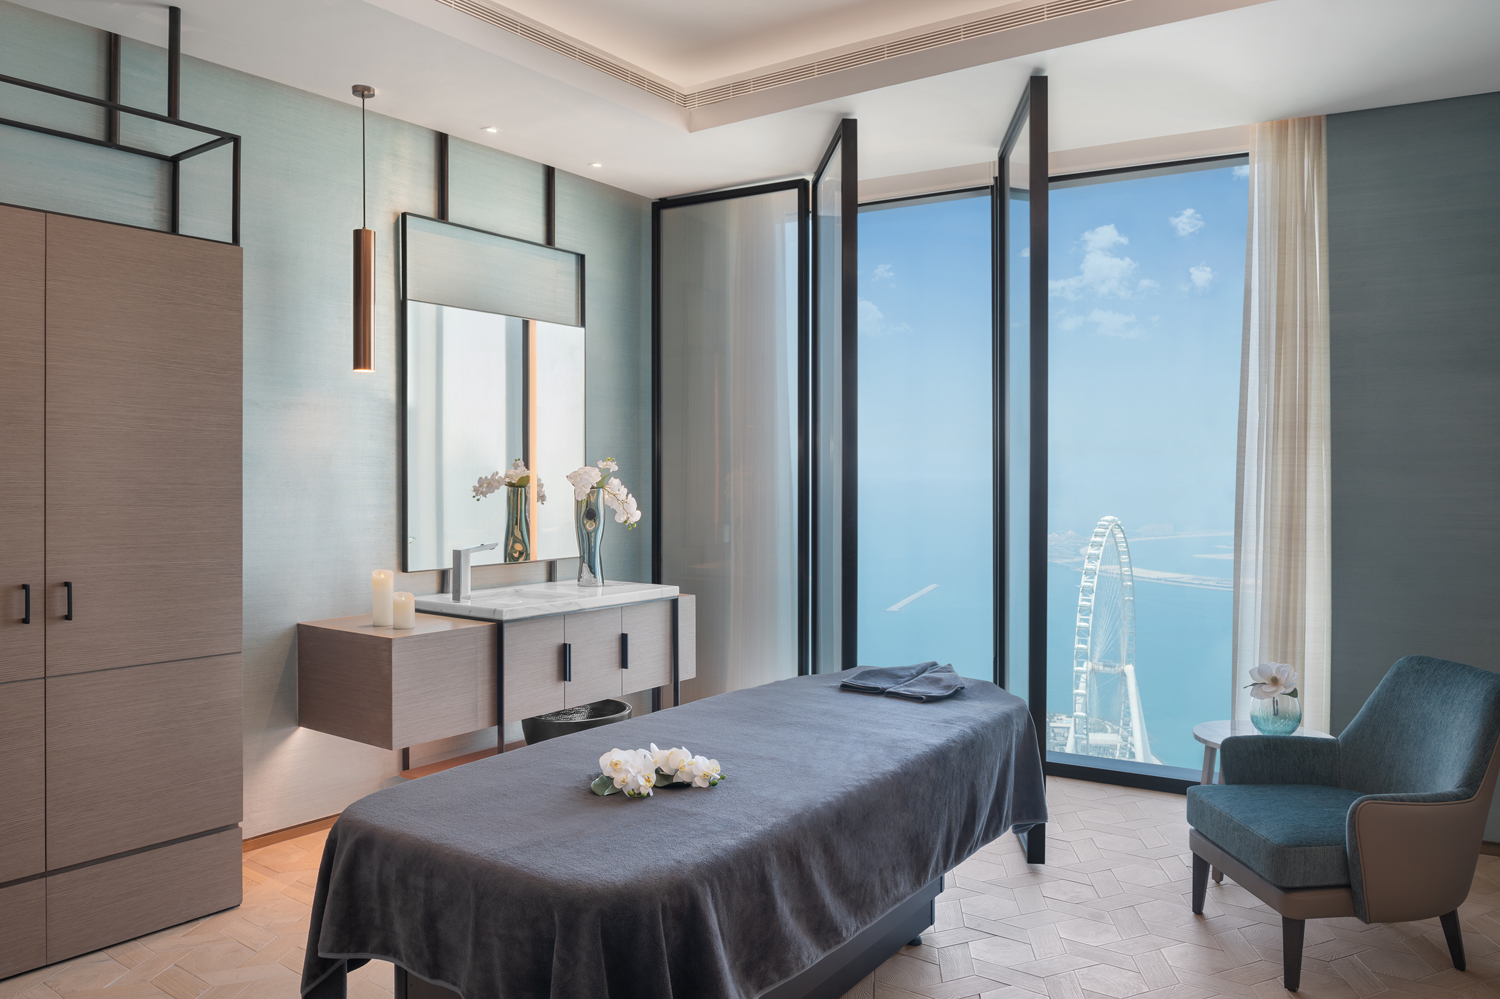 New Spa Opens At Address Beach Resort Hotelier Middle East 